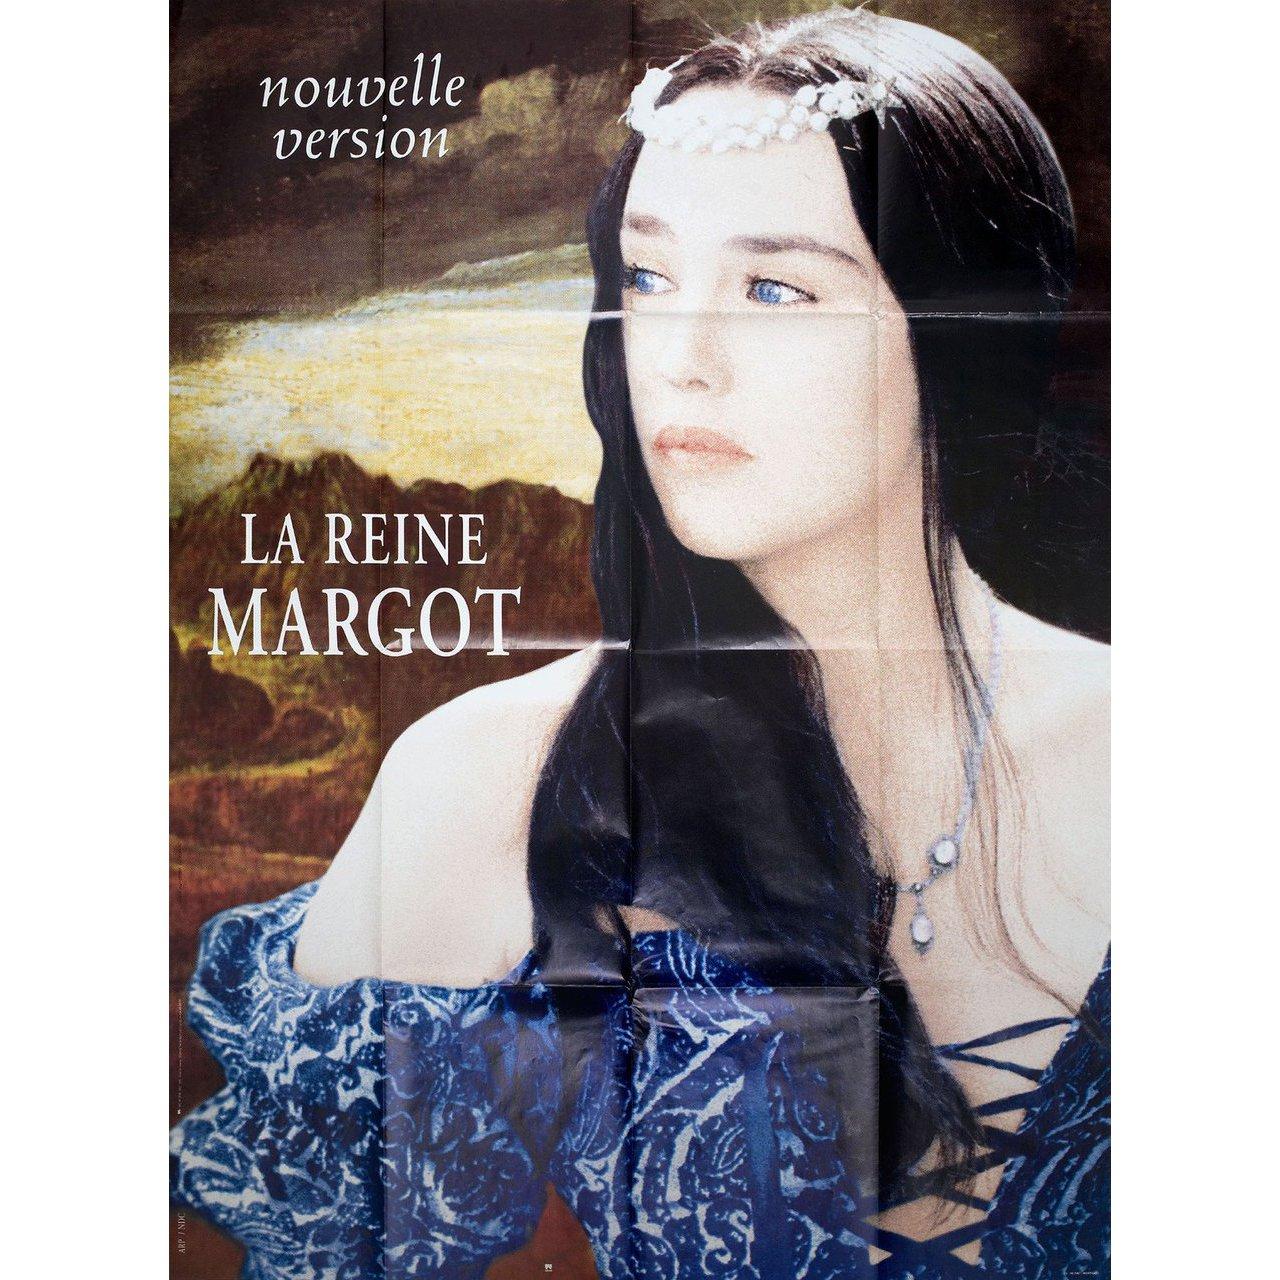 Original 1994 French grande poster for the film Queen Margot (La Reine Margot) directed by Patrice Chereau with Isabelle Adjani / Daniel Auteuil / Jean-Hugues Anglade / Vincent Perez. Fine condition, folded. Many original posters were issued folded